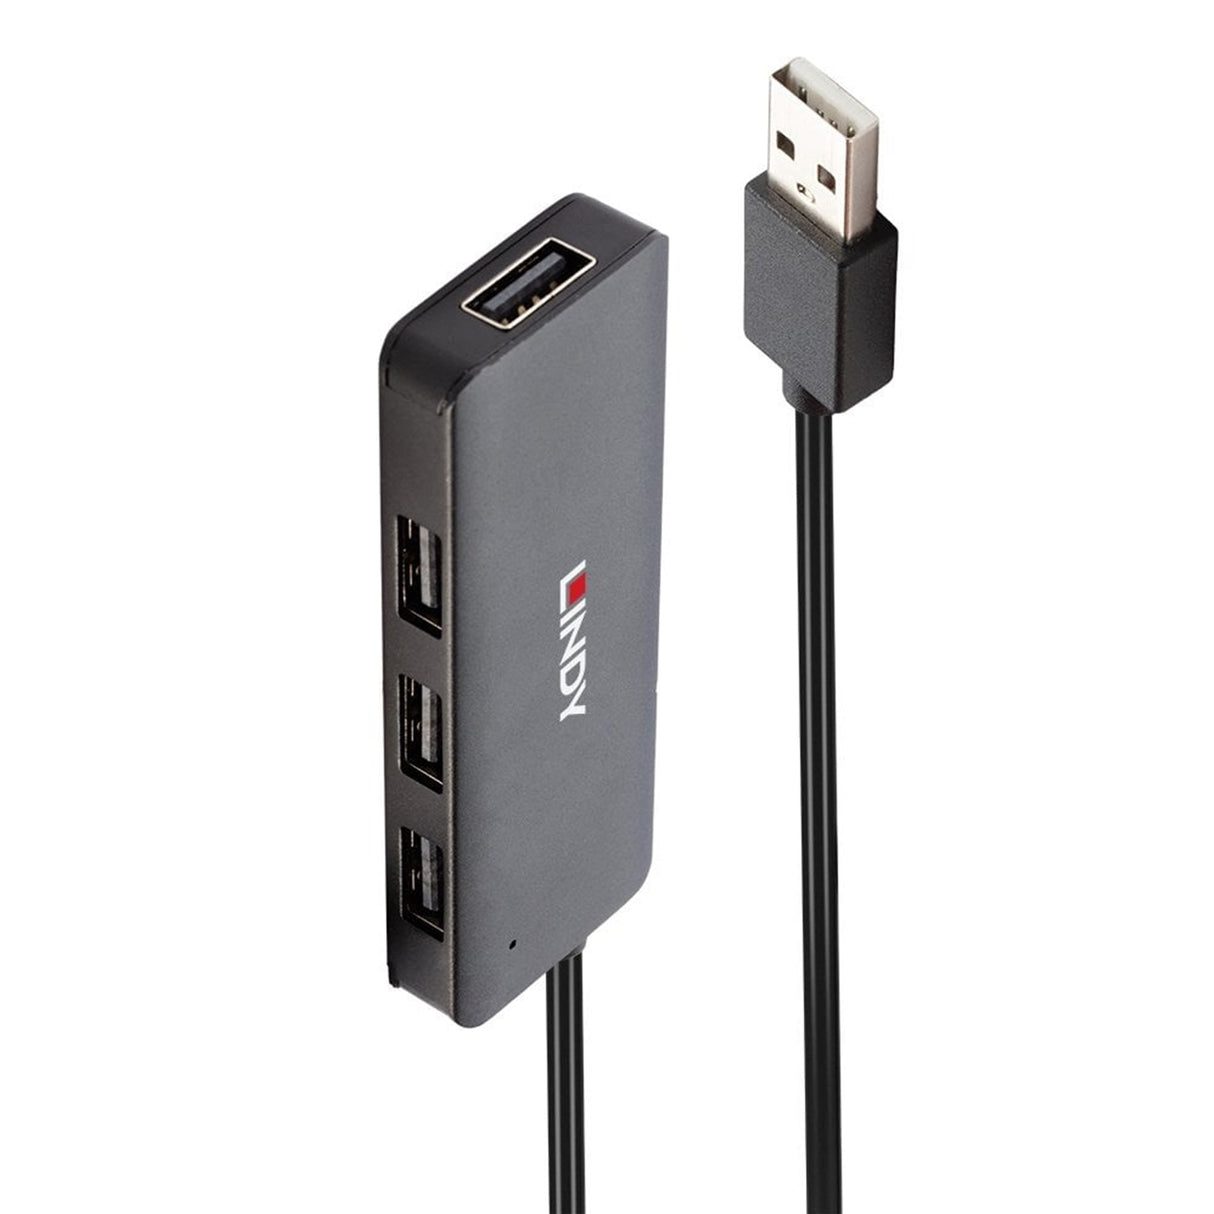 LINDY 42986 4 Port USB Hub, 4 x USB 2.0 Type-A (F) Ports, Supports Data Transfer Rates of up to 480 Mbps, Plug and Play Installation, USB Bus-Powered with DC Socket for External Power Supply